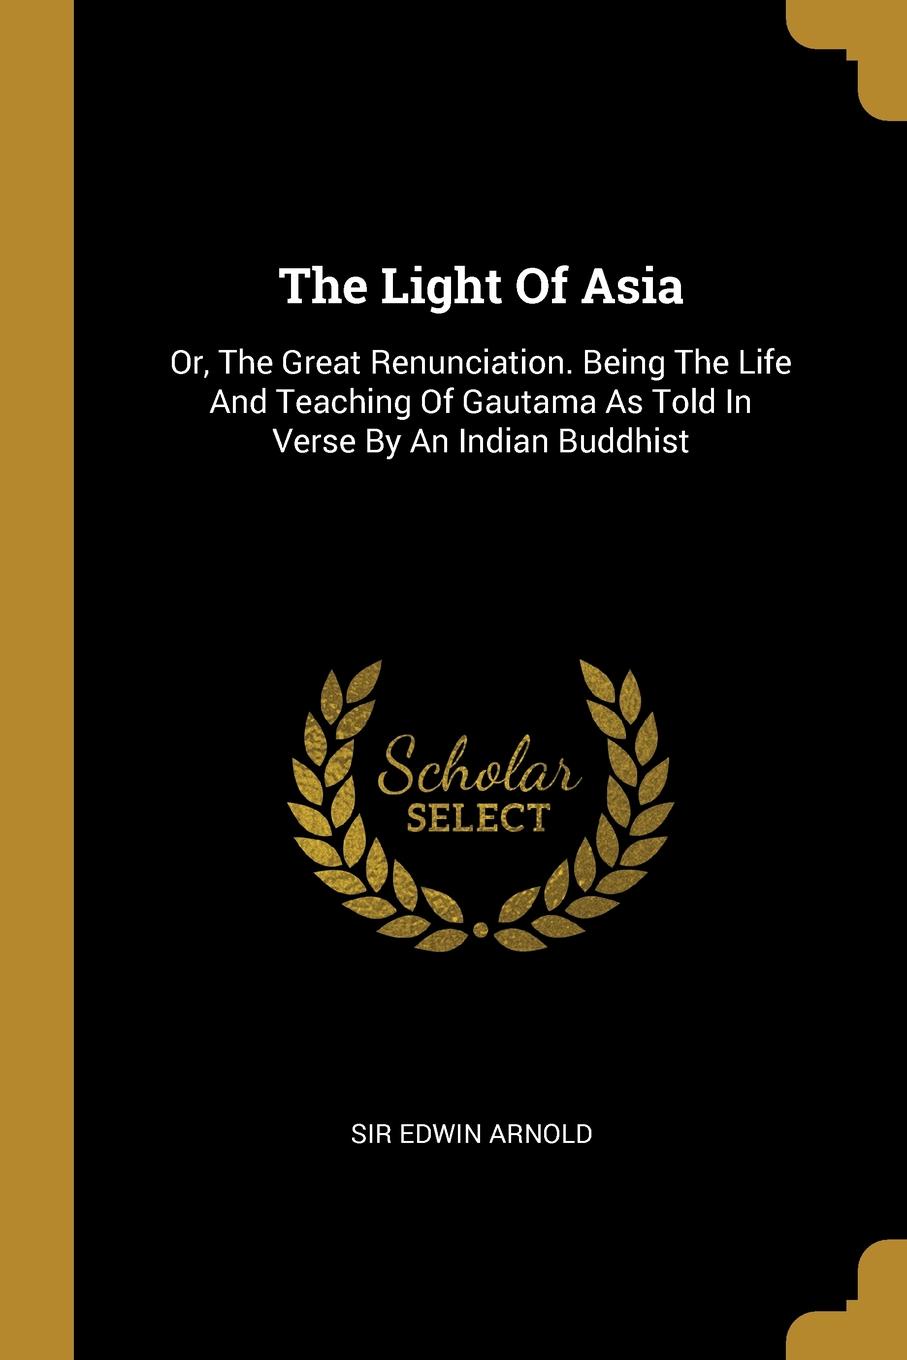 The Light Of Asia. Or, The Great Renunciation. Being The Life And Teaching Of Gautama As Told In Verse By An Indian Buddhist